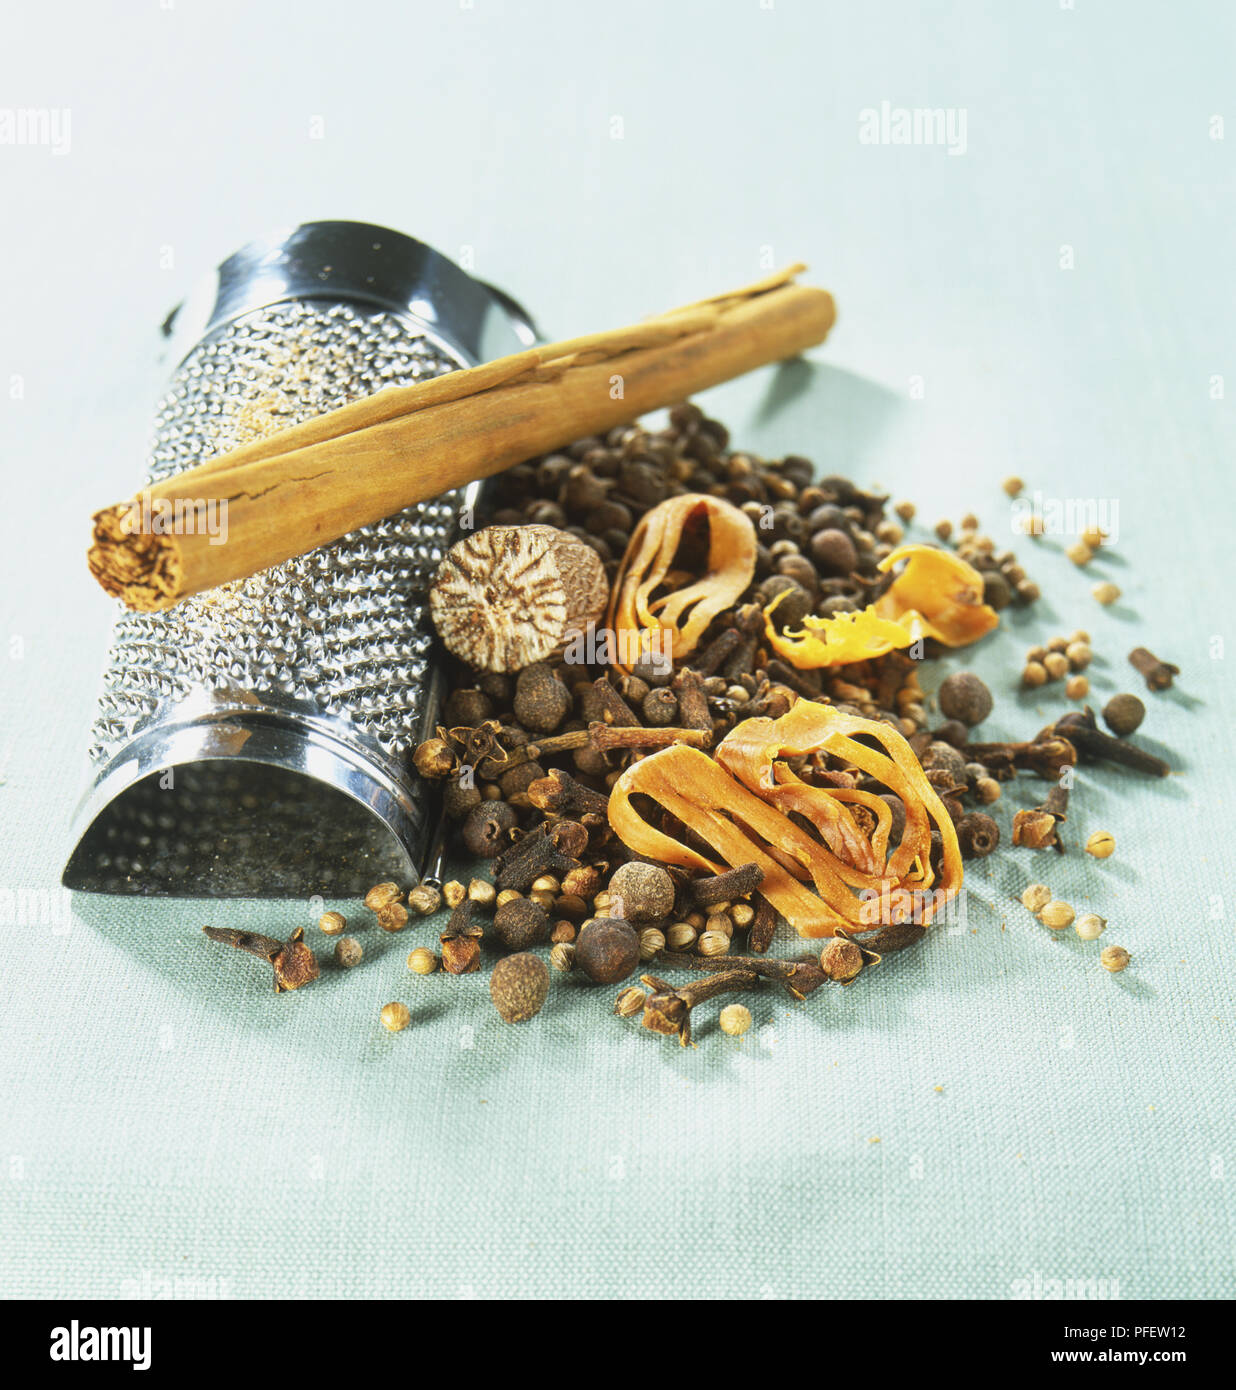 Mixed spice ingredients, including allspice berries, coriander seed,  cloves, mace, nutmeg, cinnamon quills, and metal grater Stock Photo - Alamy